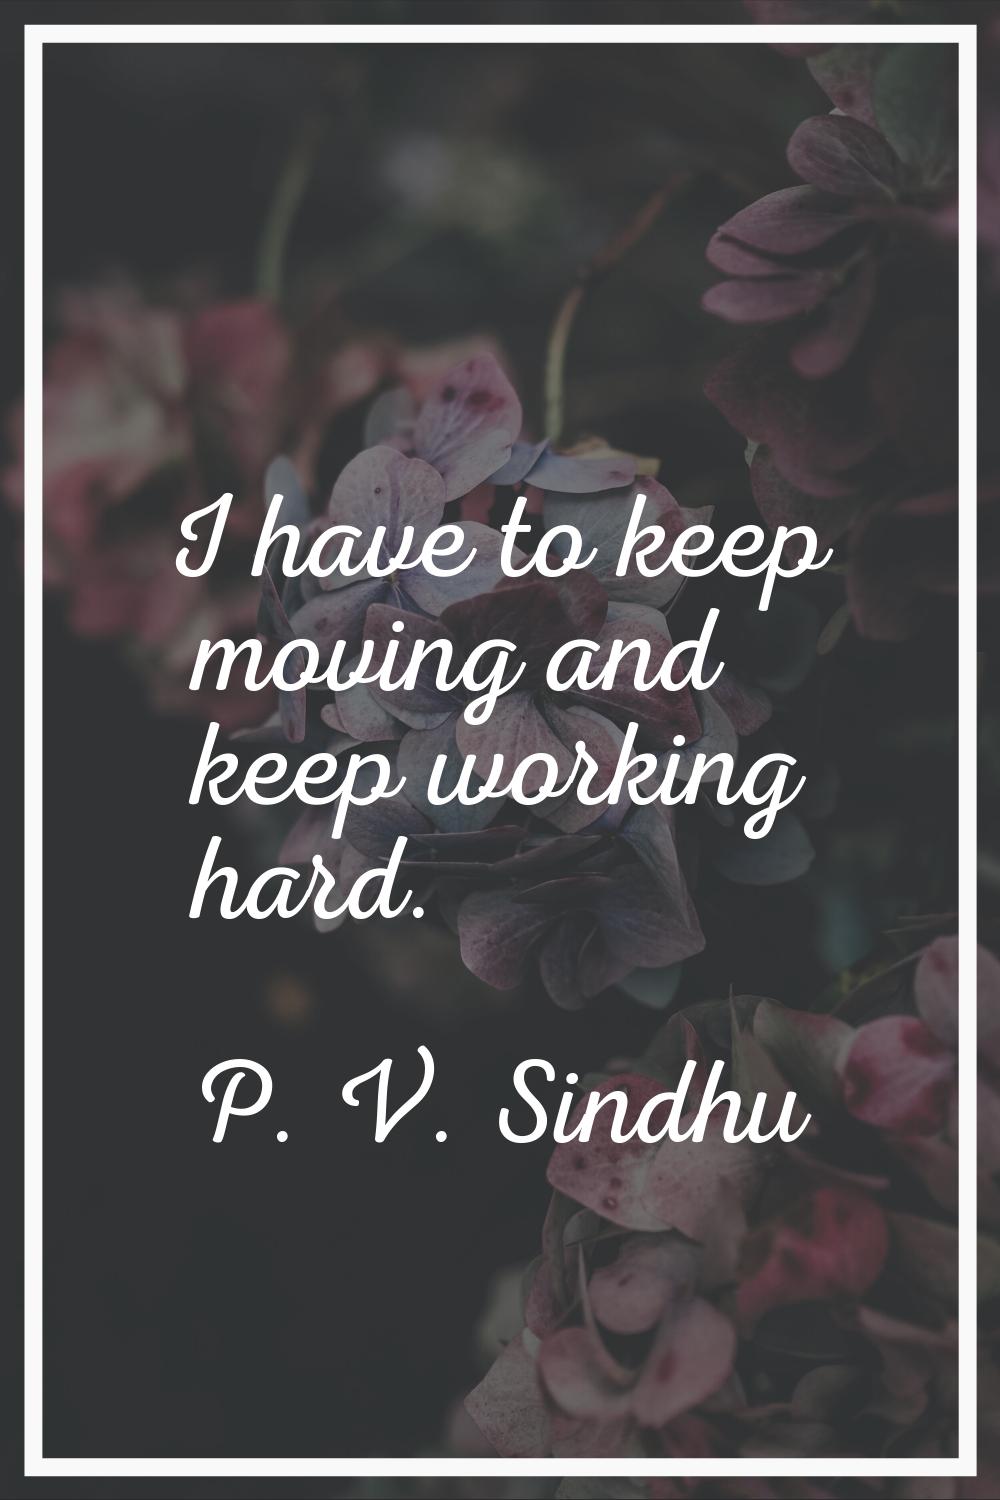 I have to keep moving and keep working hard.